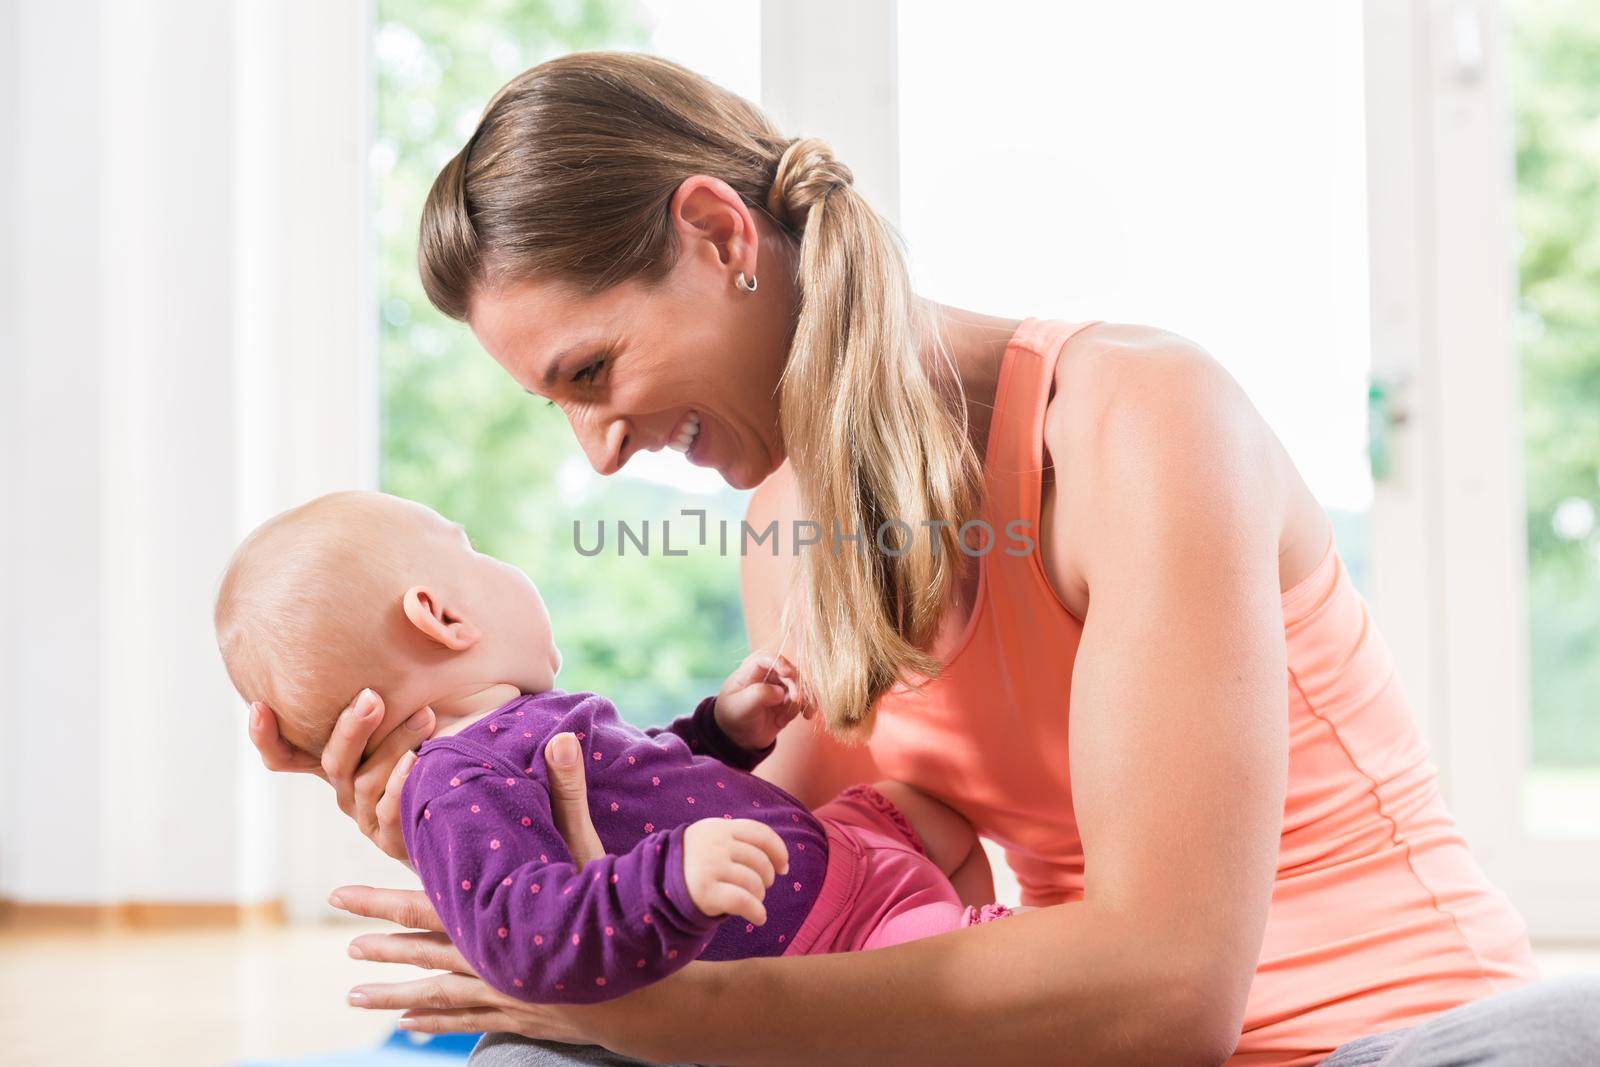 Mom and newborn baby playing together in baby course learning together